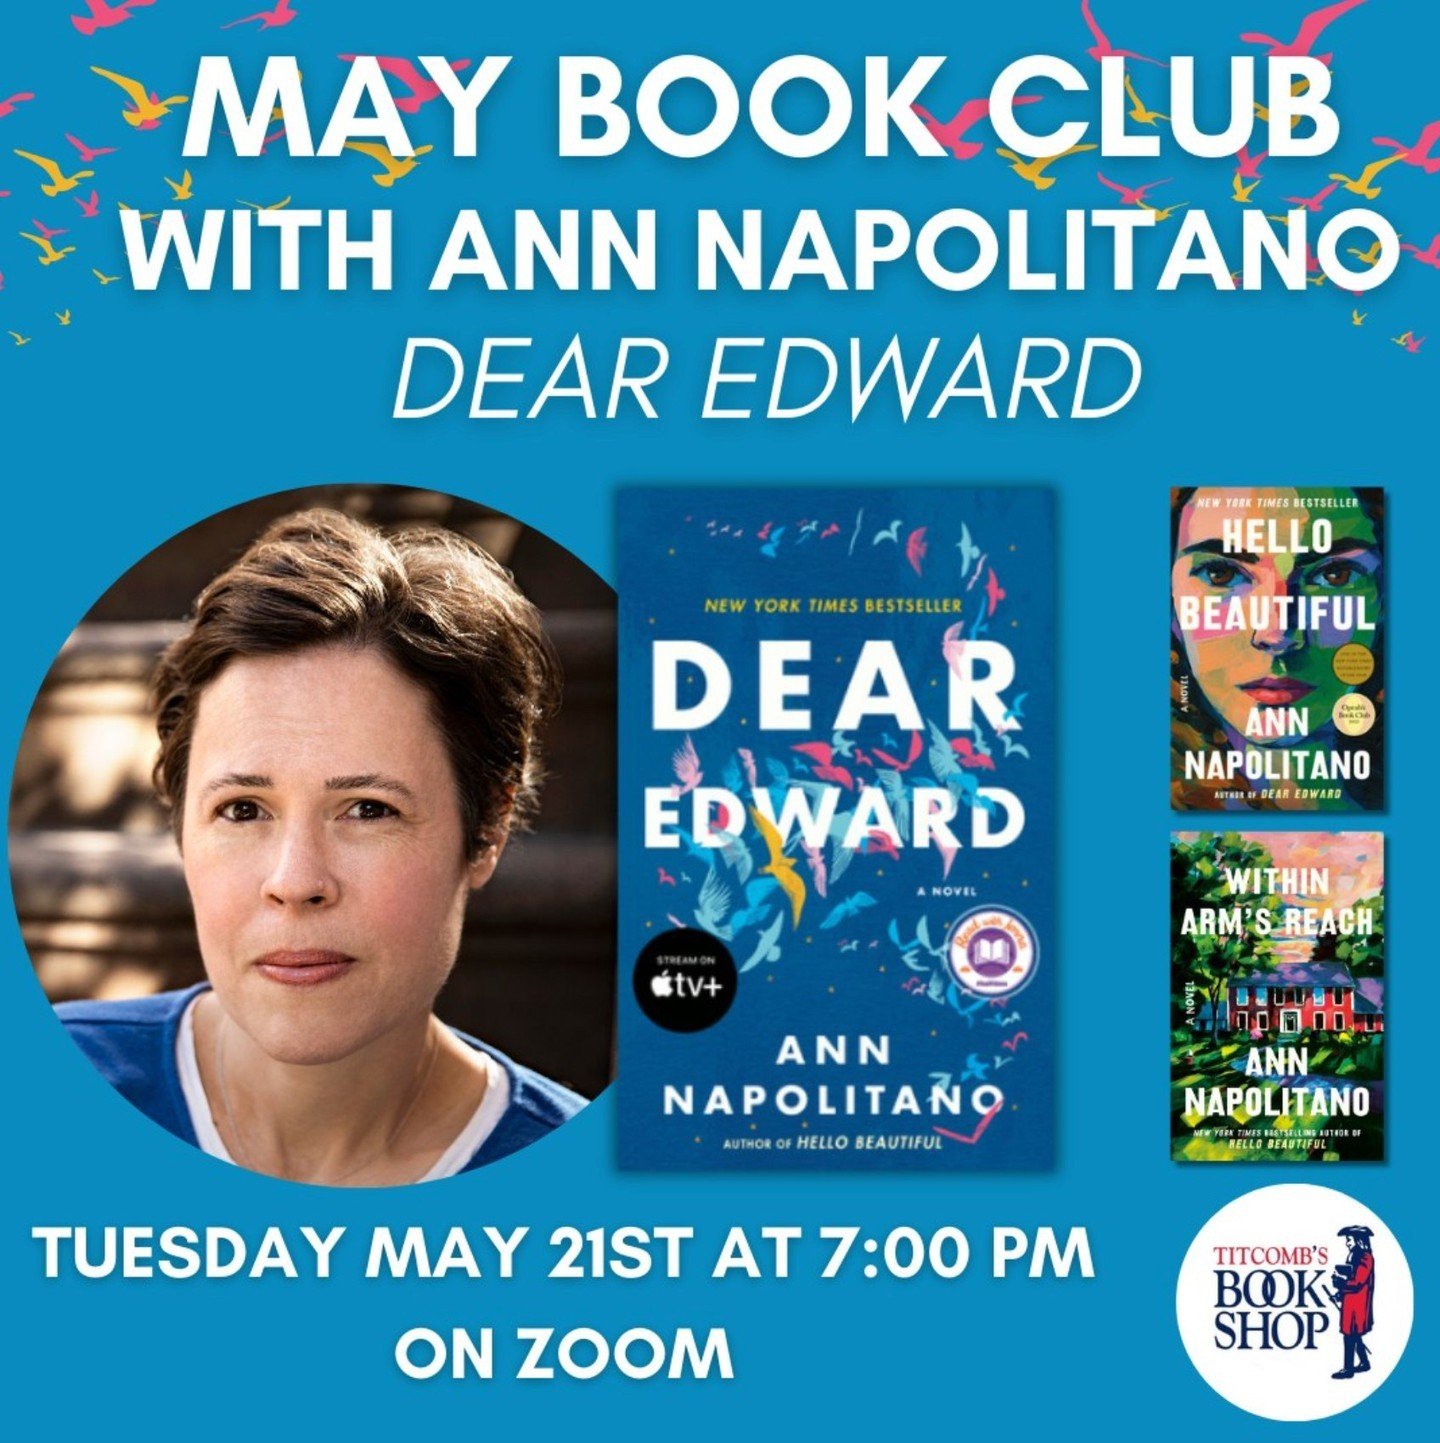 @titcombsbookshop hosts bestselling #author @annnapolitano for its May VIRTUAL #bookclub to discuss DEAR EDWARD (@randomhouse). Info @ Lit Events in bio. #fiction #bookstagram #CenterForTheBook @masslibassoc @mblclibraries @neibabooks